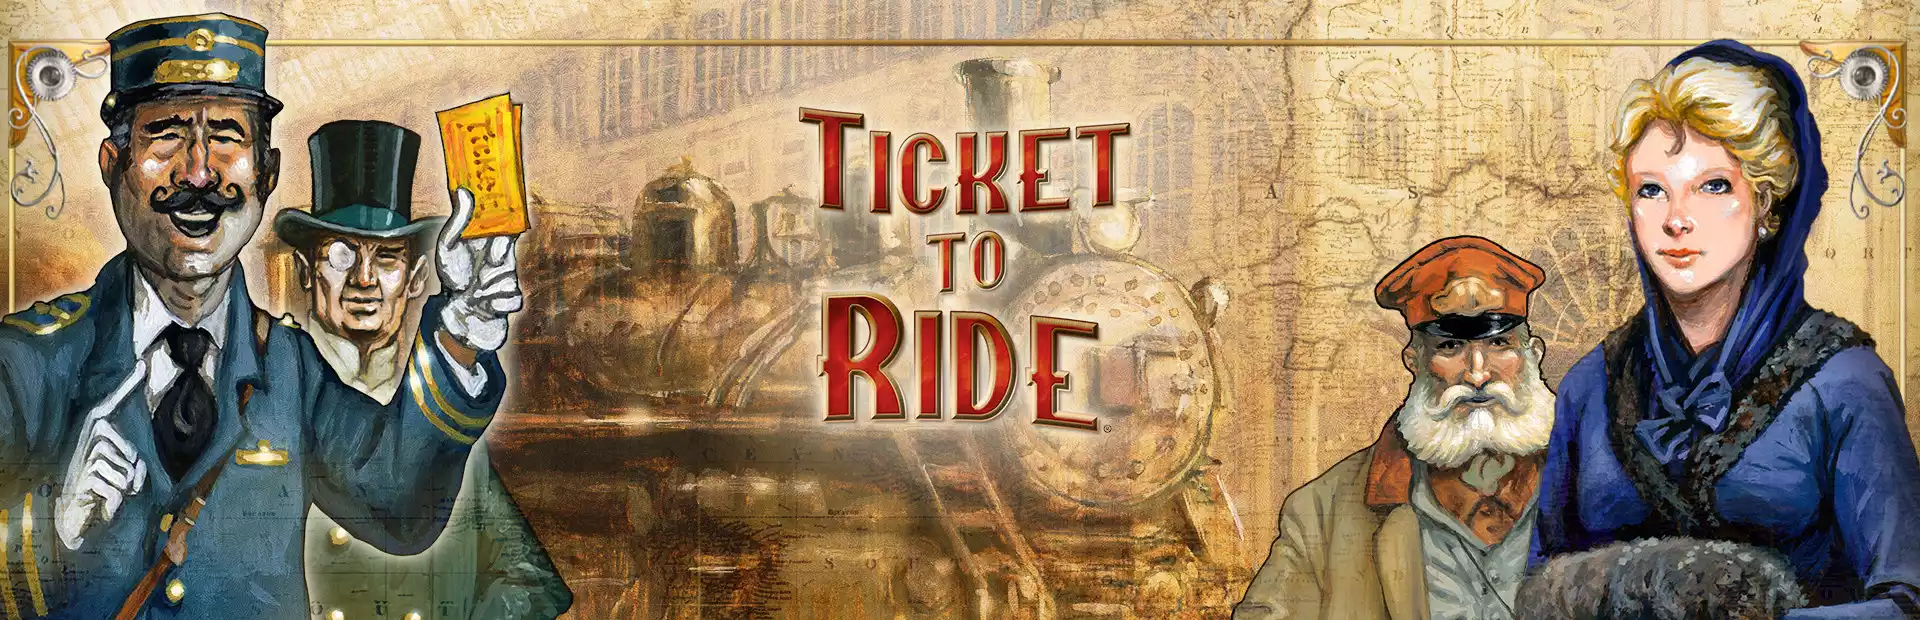 Ticket to Ride Steam Key China